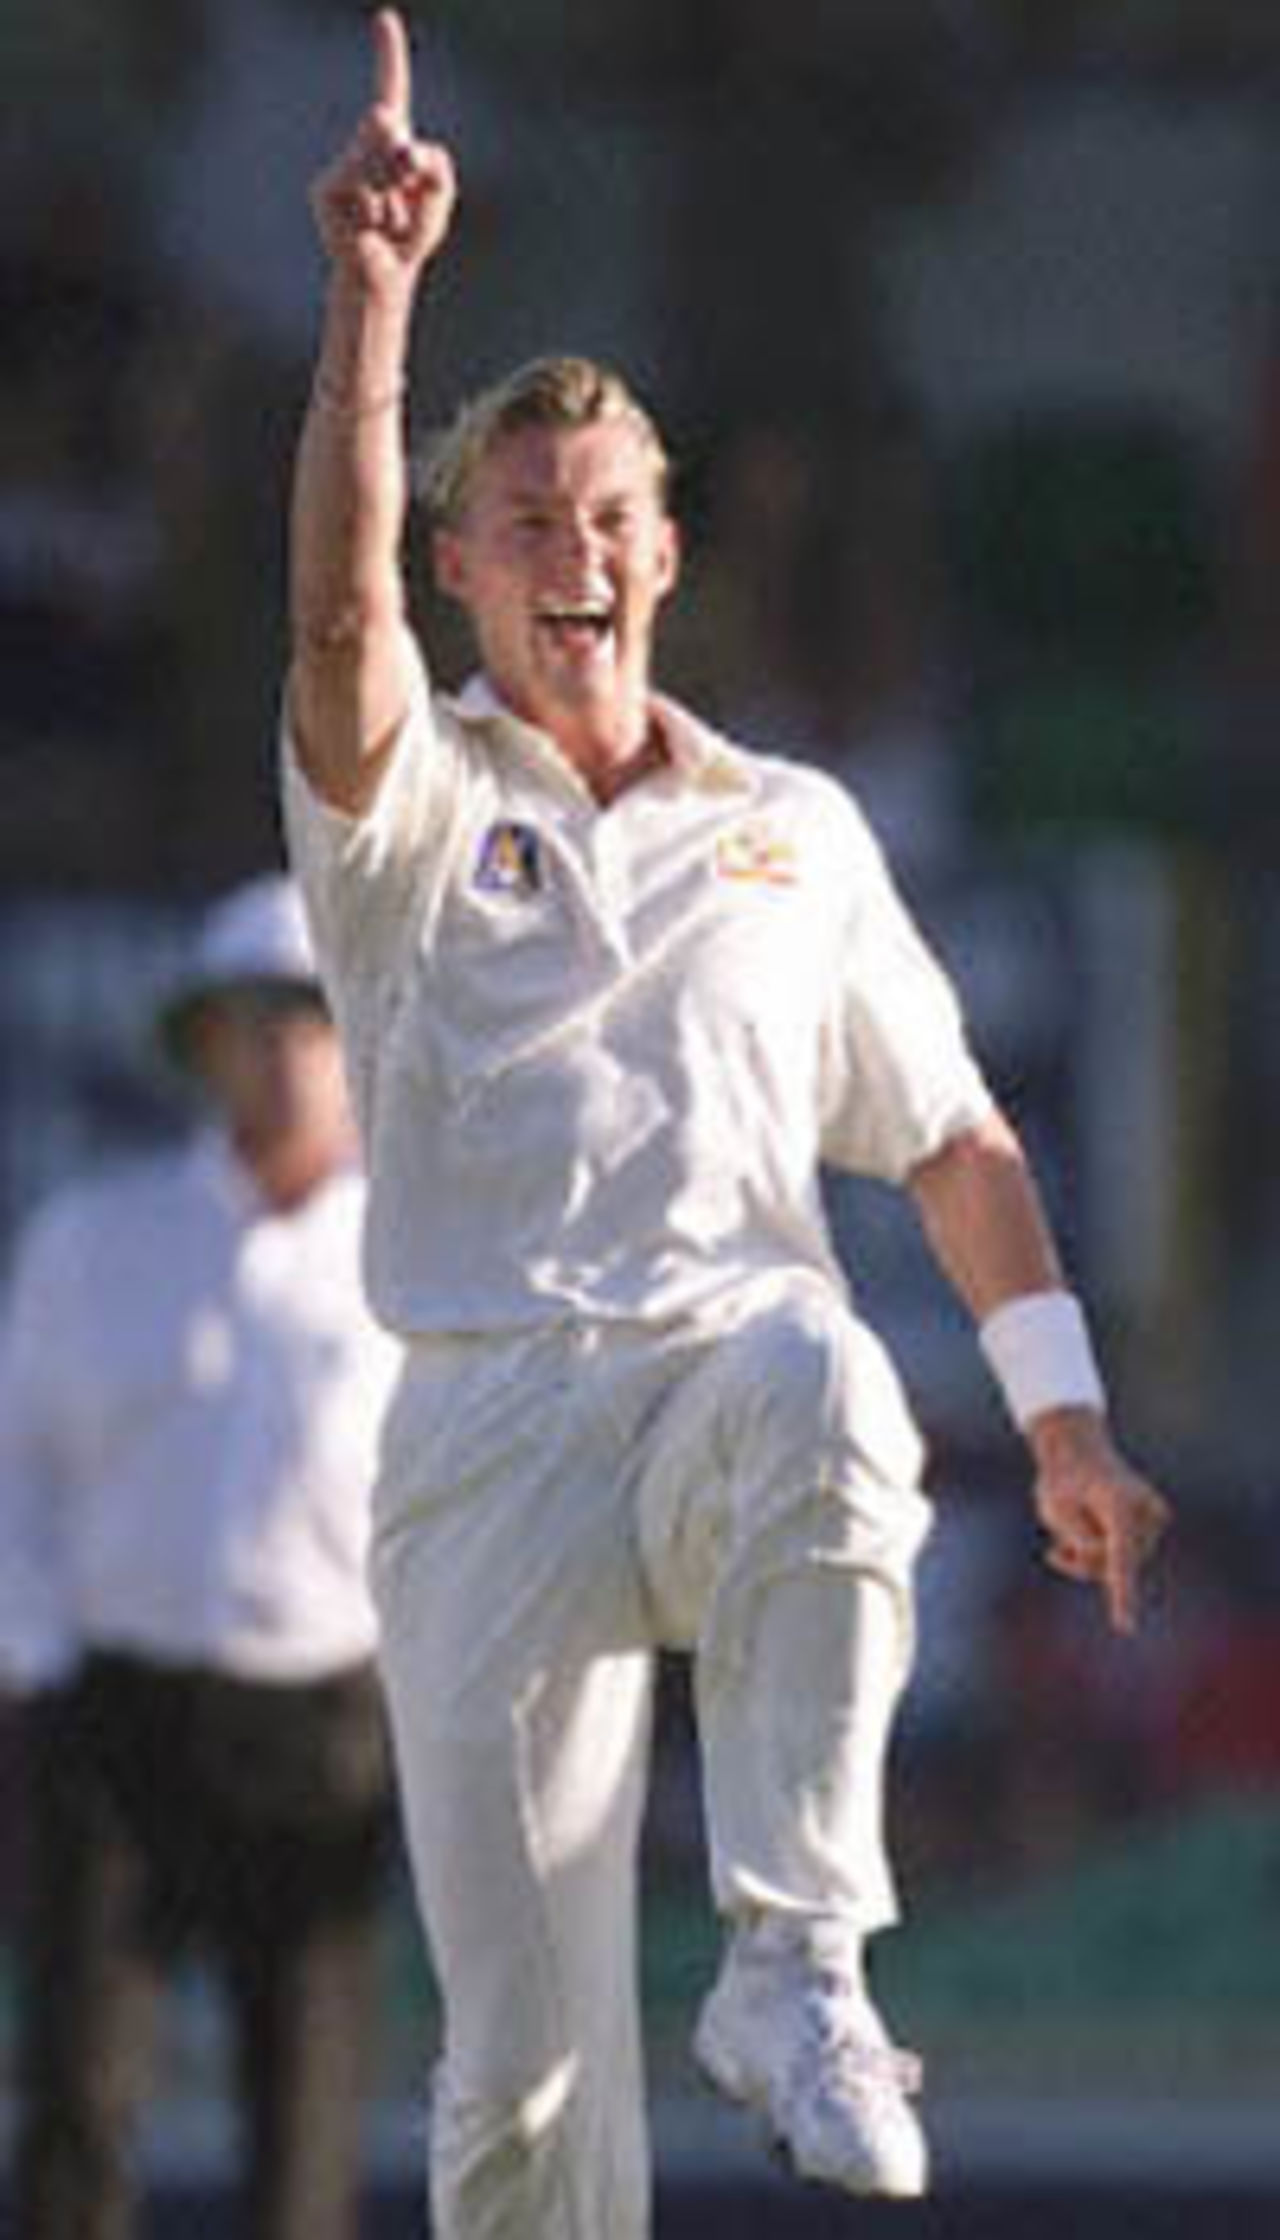 A delighted Brett lee after taking the wicket of Campbell, The Frank Worrell Trophy, 2000/01, 2nd Test, Australia v West Indies, W.A.C.A. Ground, Perth, 01-05 December 2000 (Day 2).